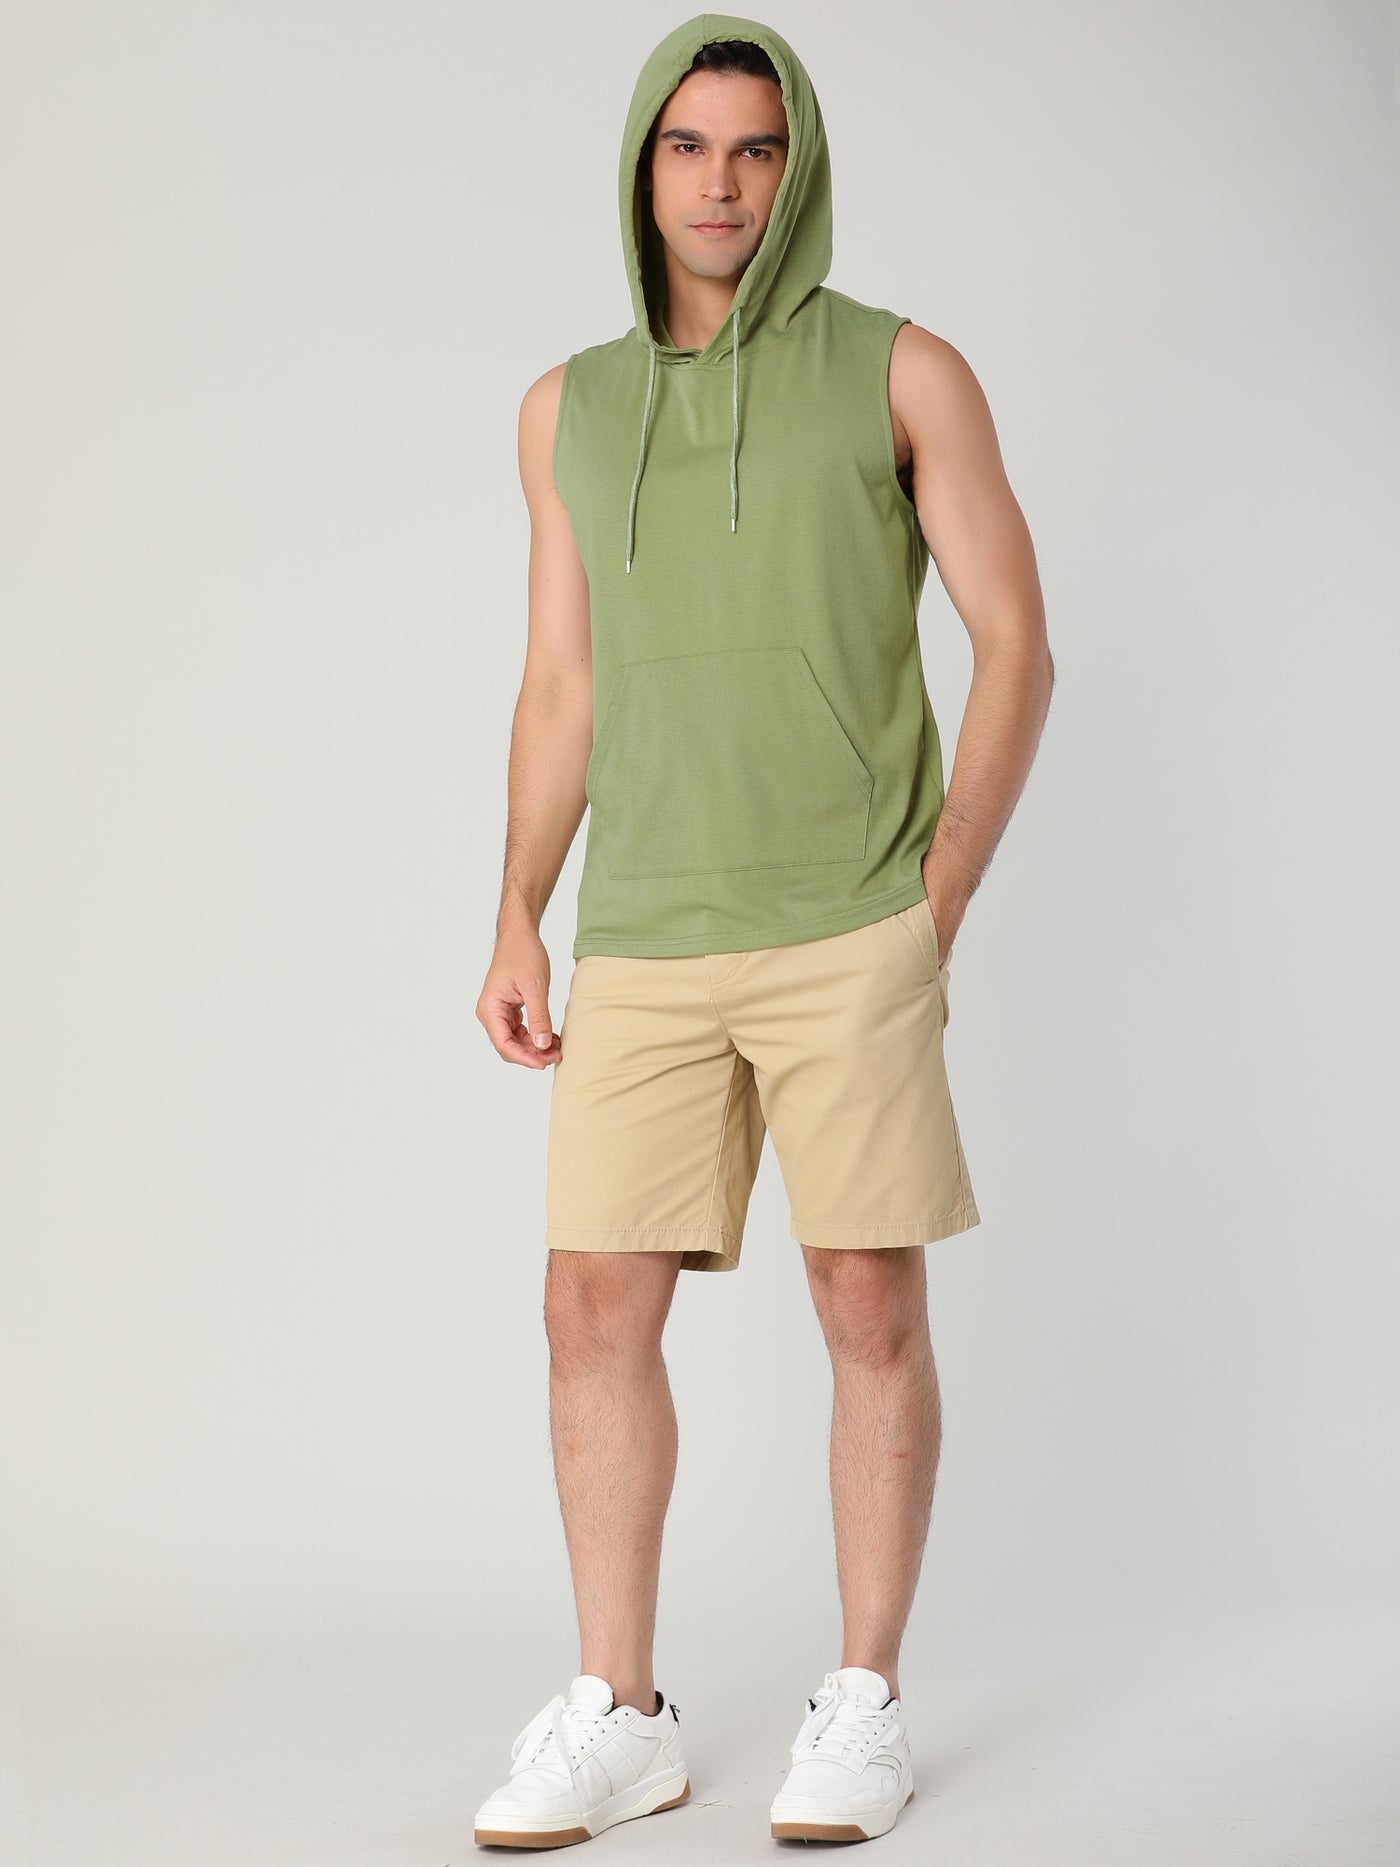 Bublédon Casual Gym Athletic Sleeveless Tank Tops Hooded Vests